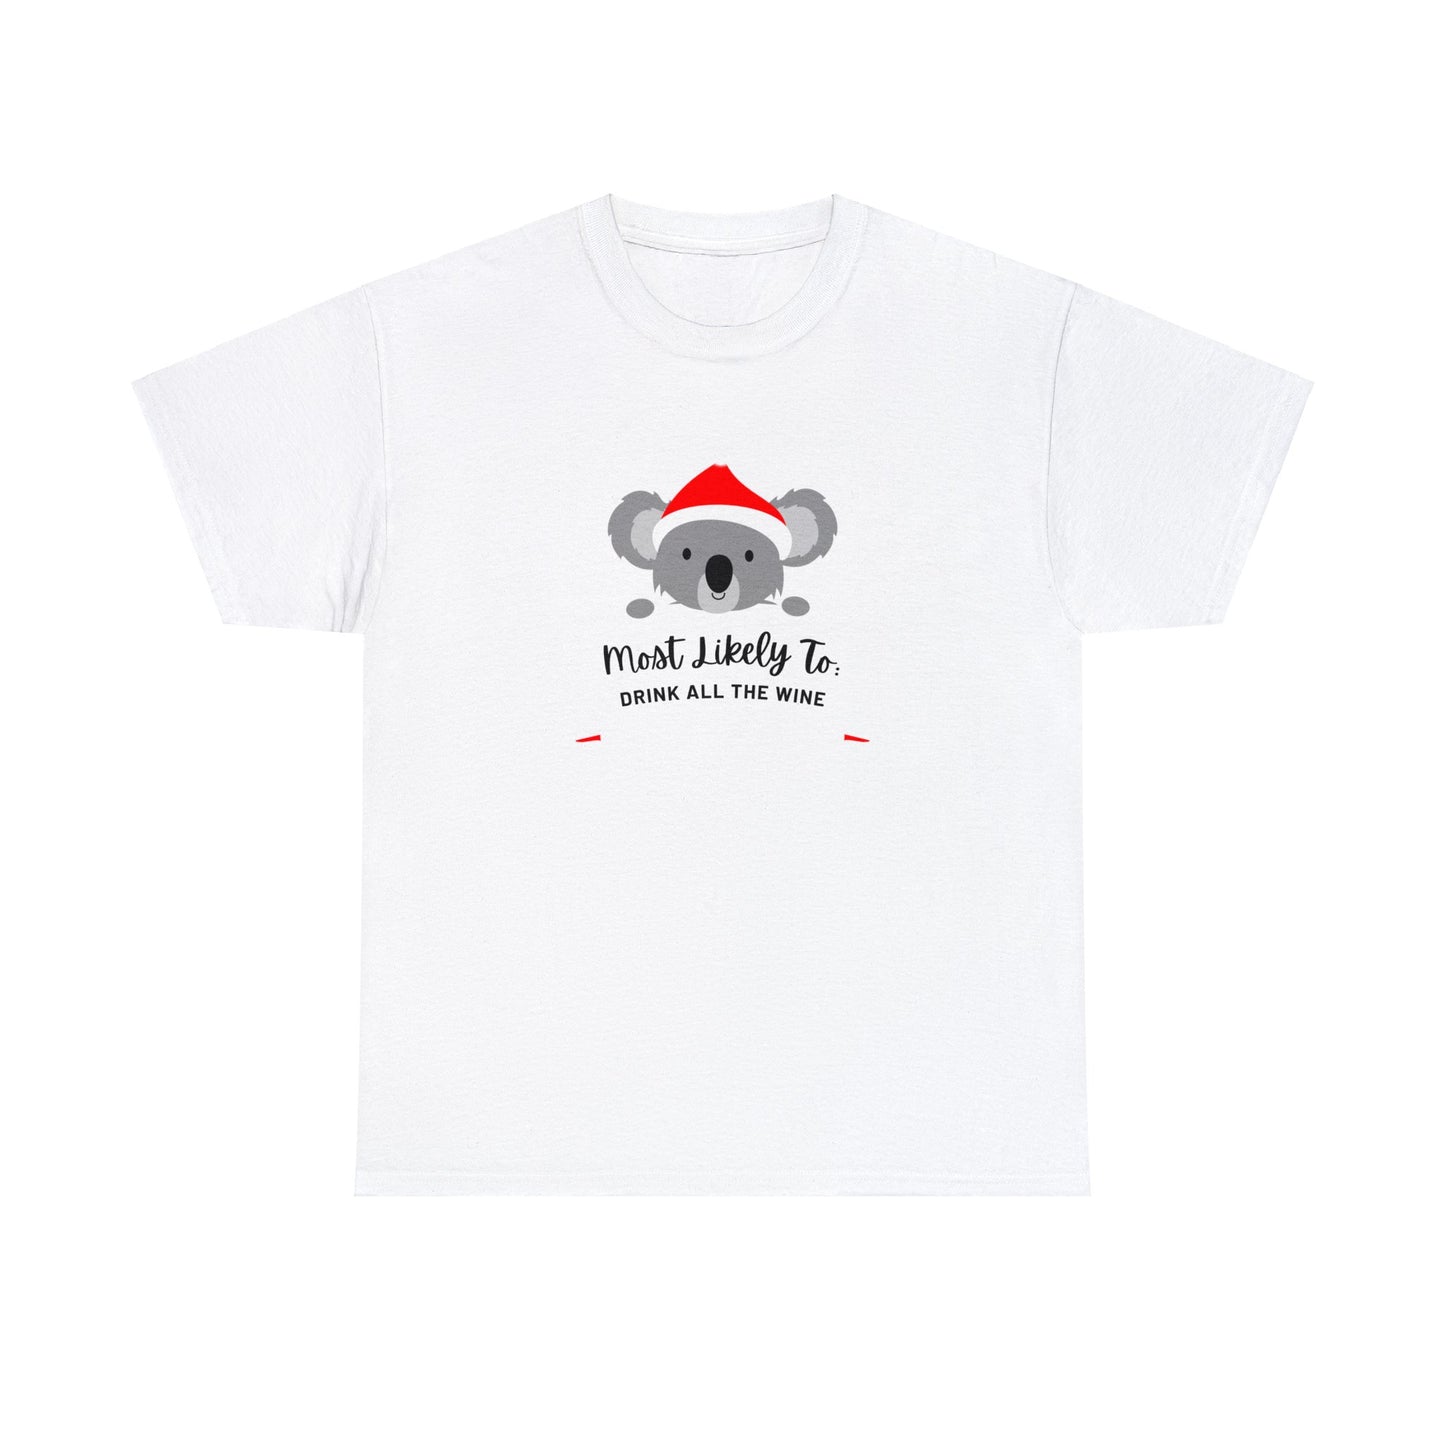 Most Likely To Drink All The Wine - Christmas T-Shirt